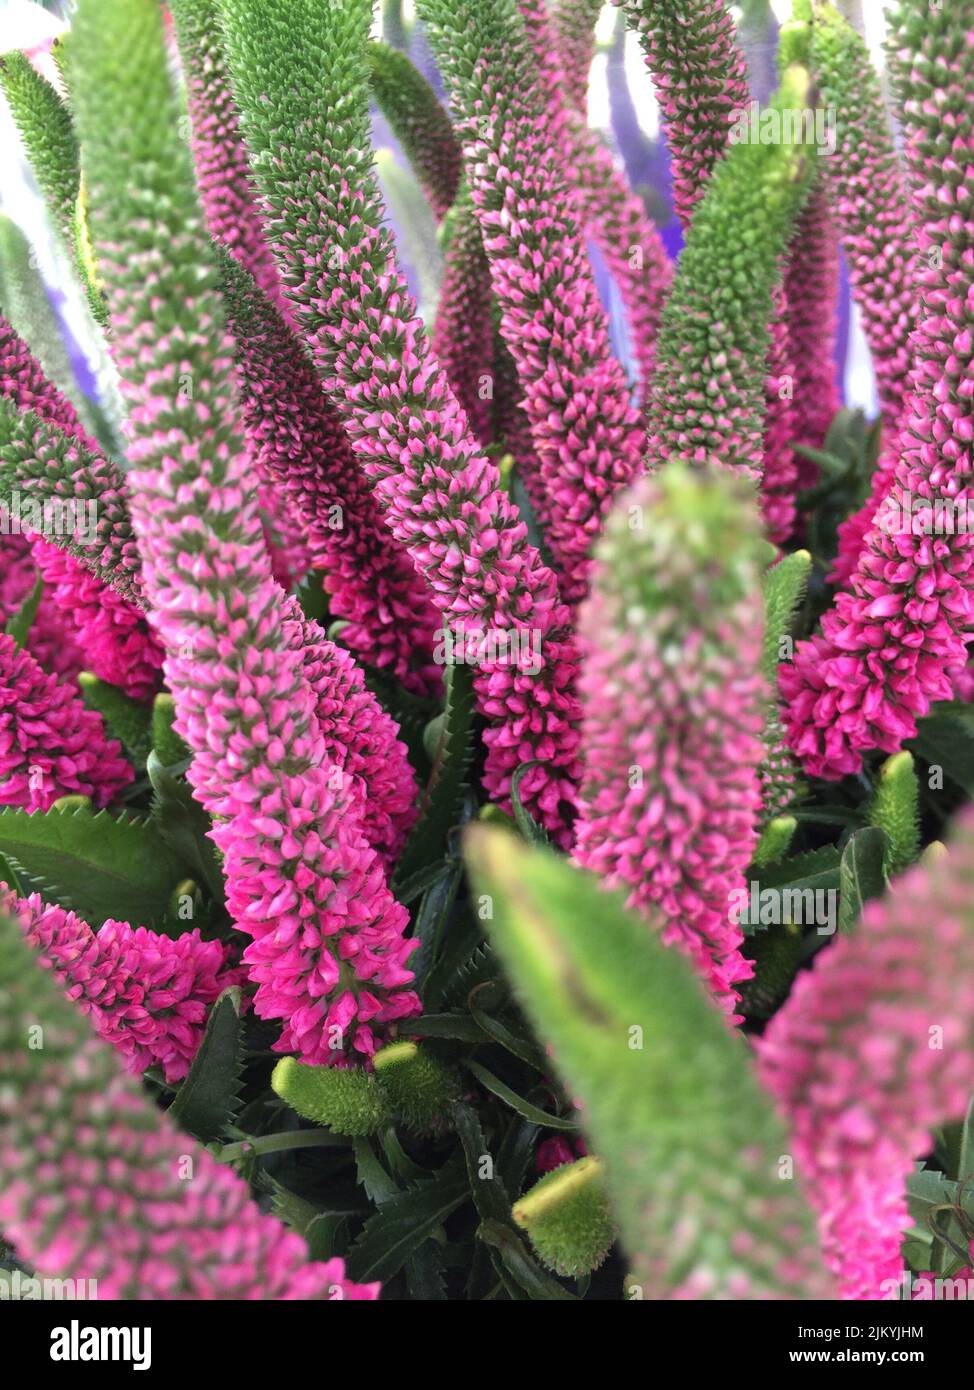 A close up on a Veronica spicata (spiked speedwell) flower Stock Photo